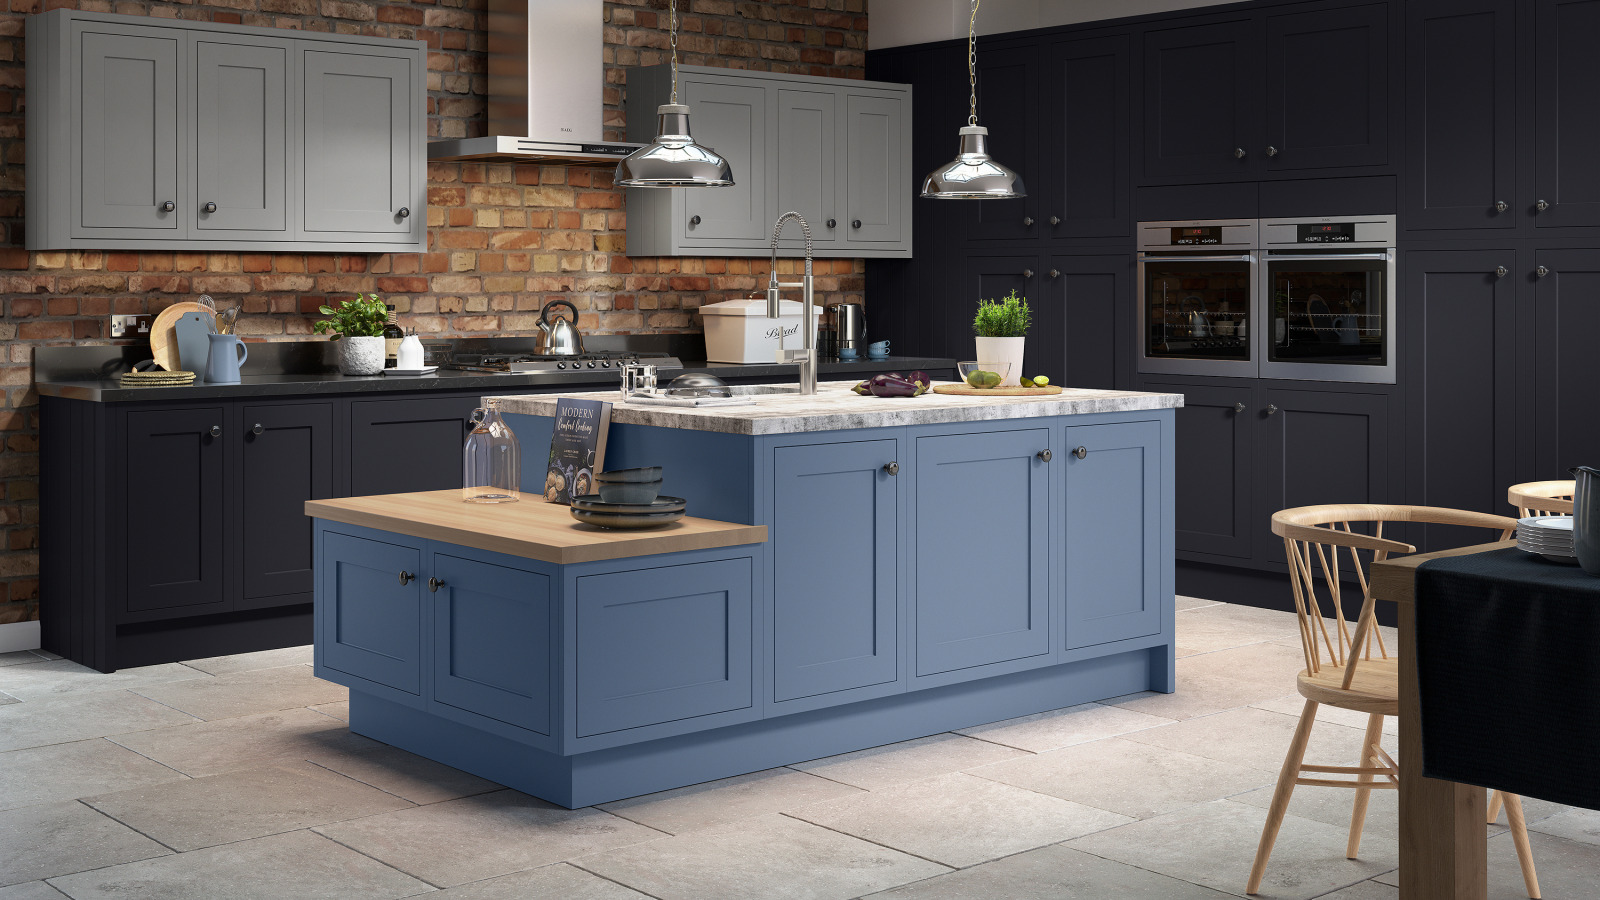 Traditional Kitchens - York Kitchens & Interiors | Bathrooms | Bedrooms